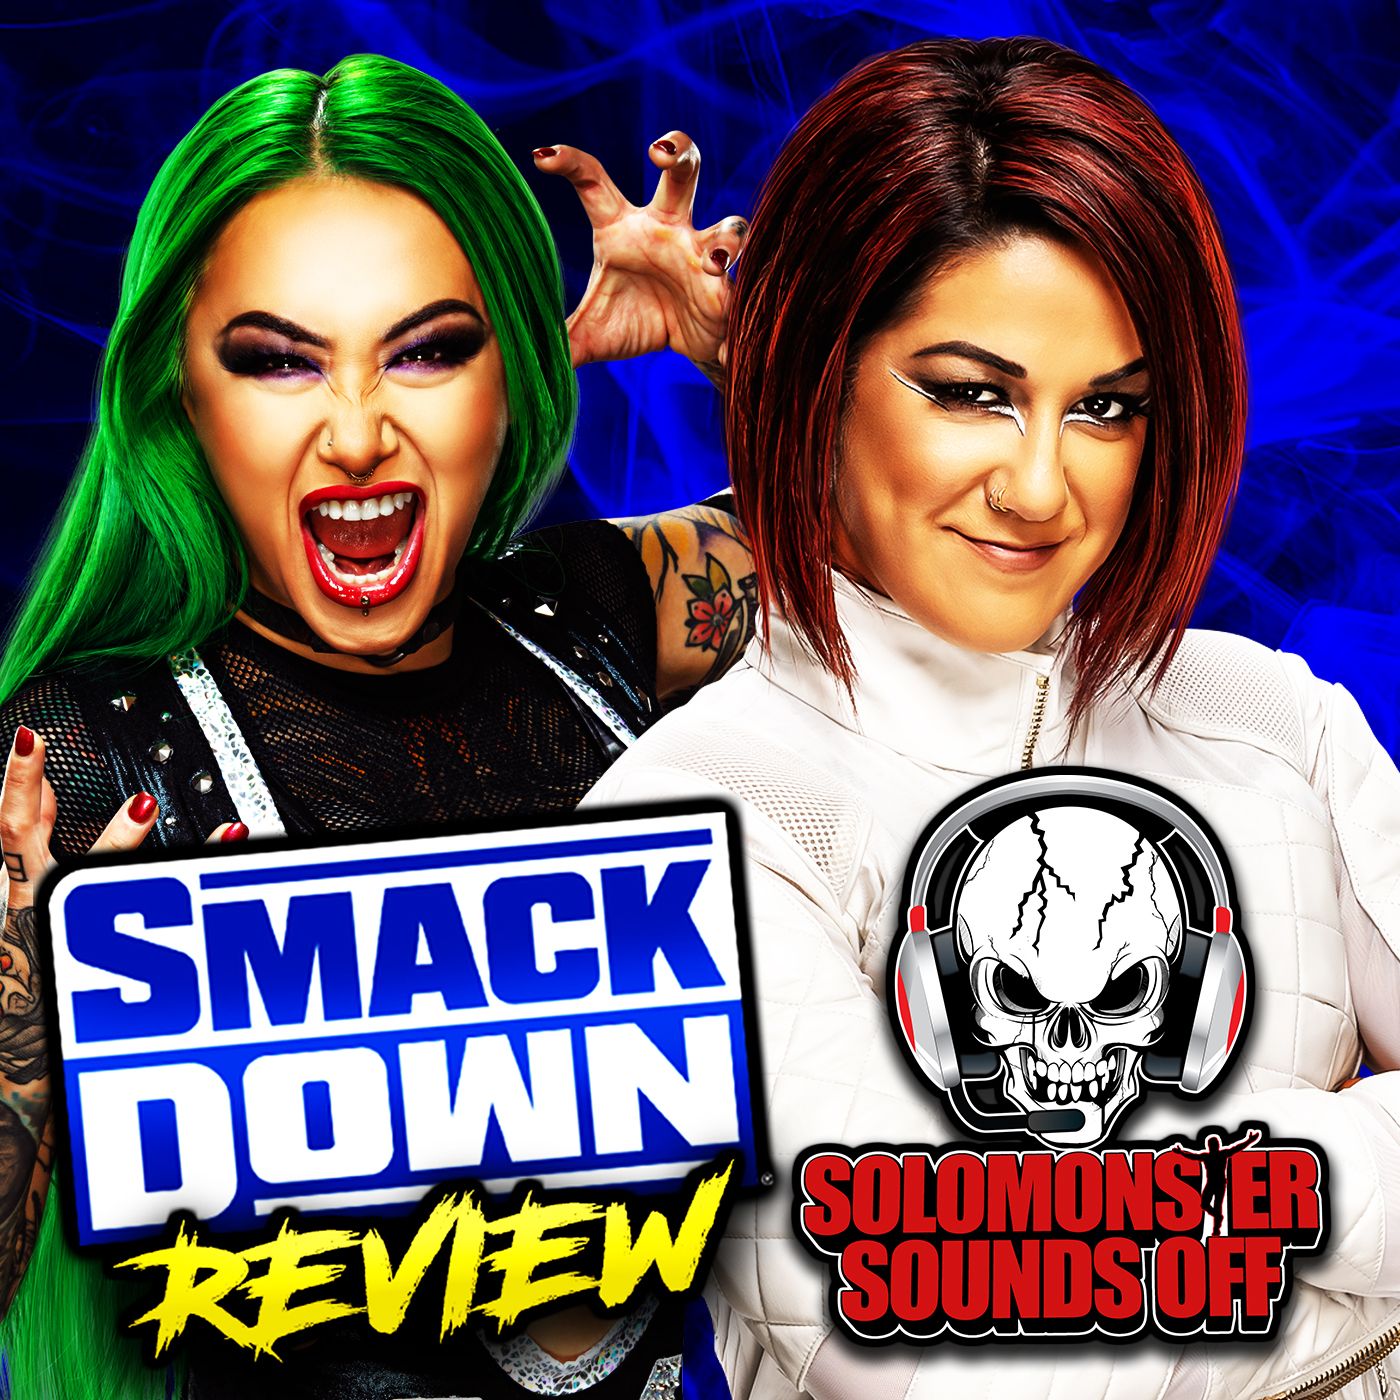 WWE Smackdown 8/4/23 Review - LAST STOP TO SUMMERSLAM, STREET PROFITS 